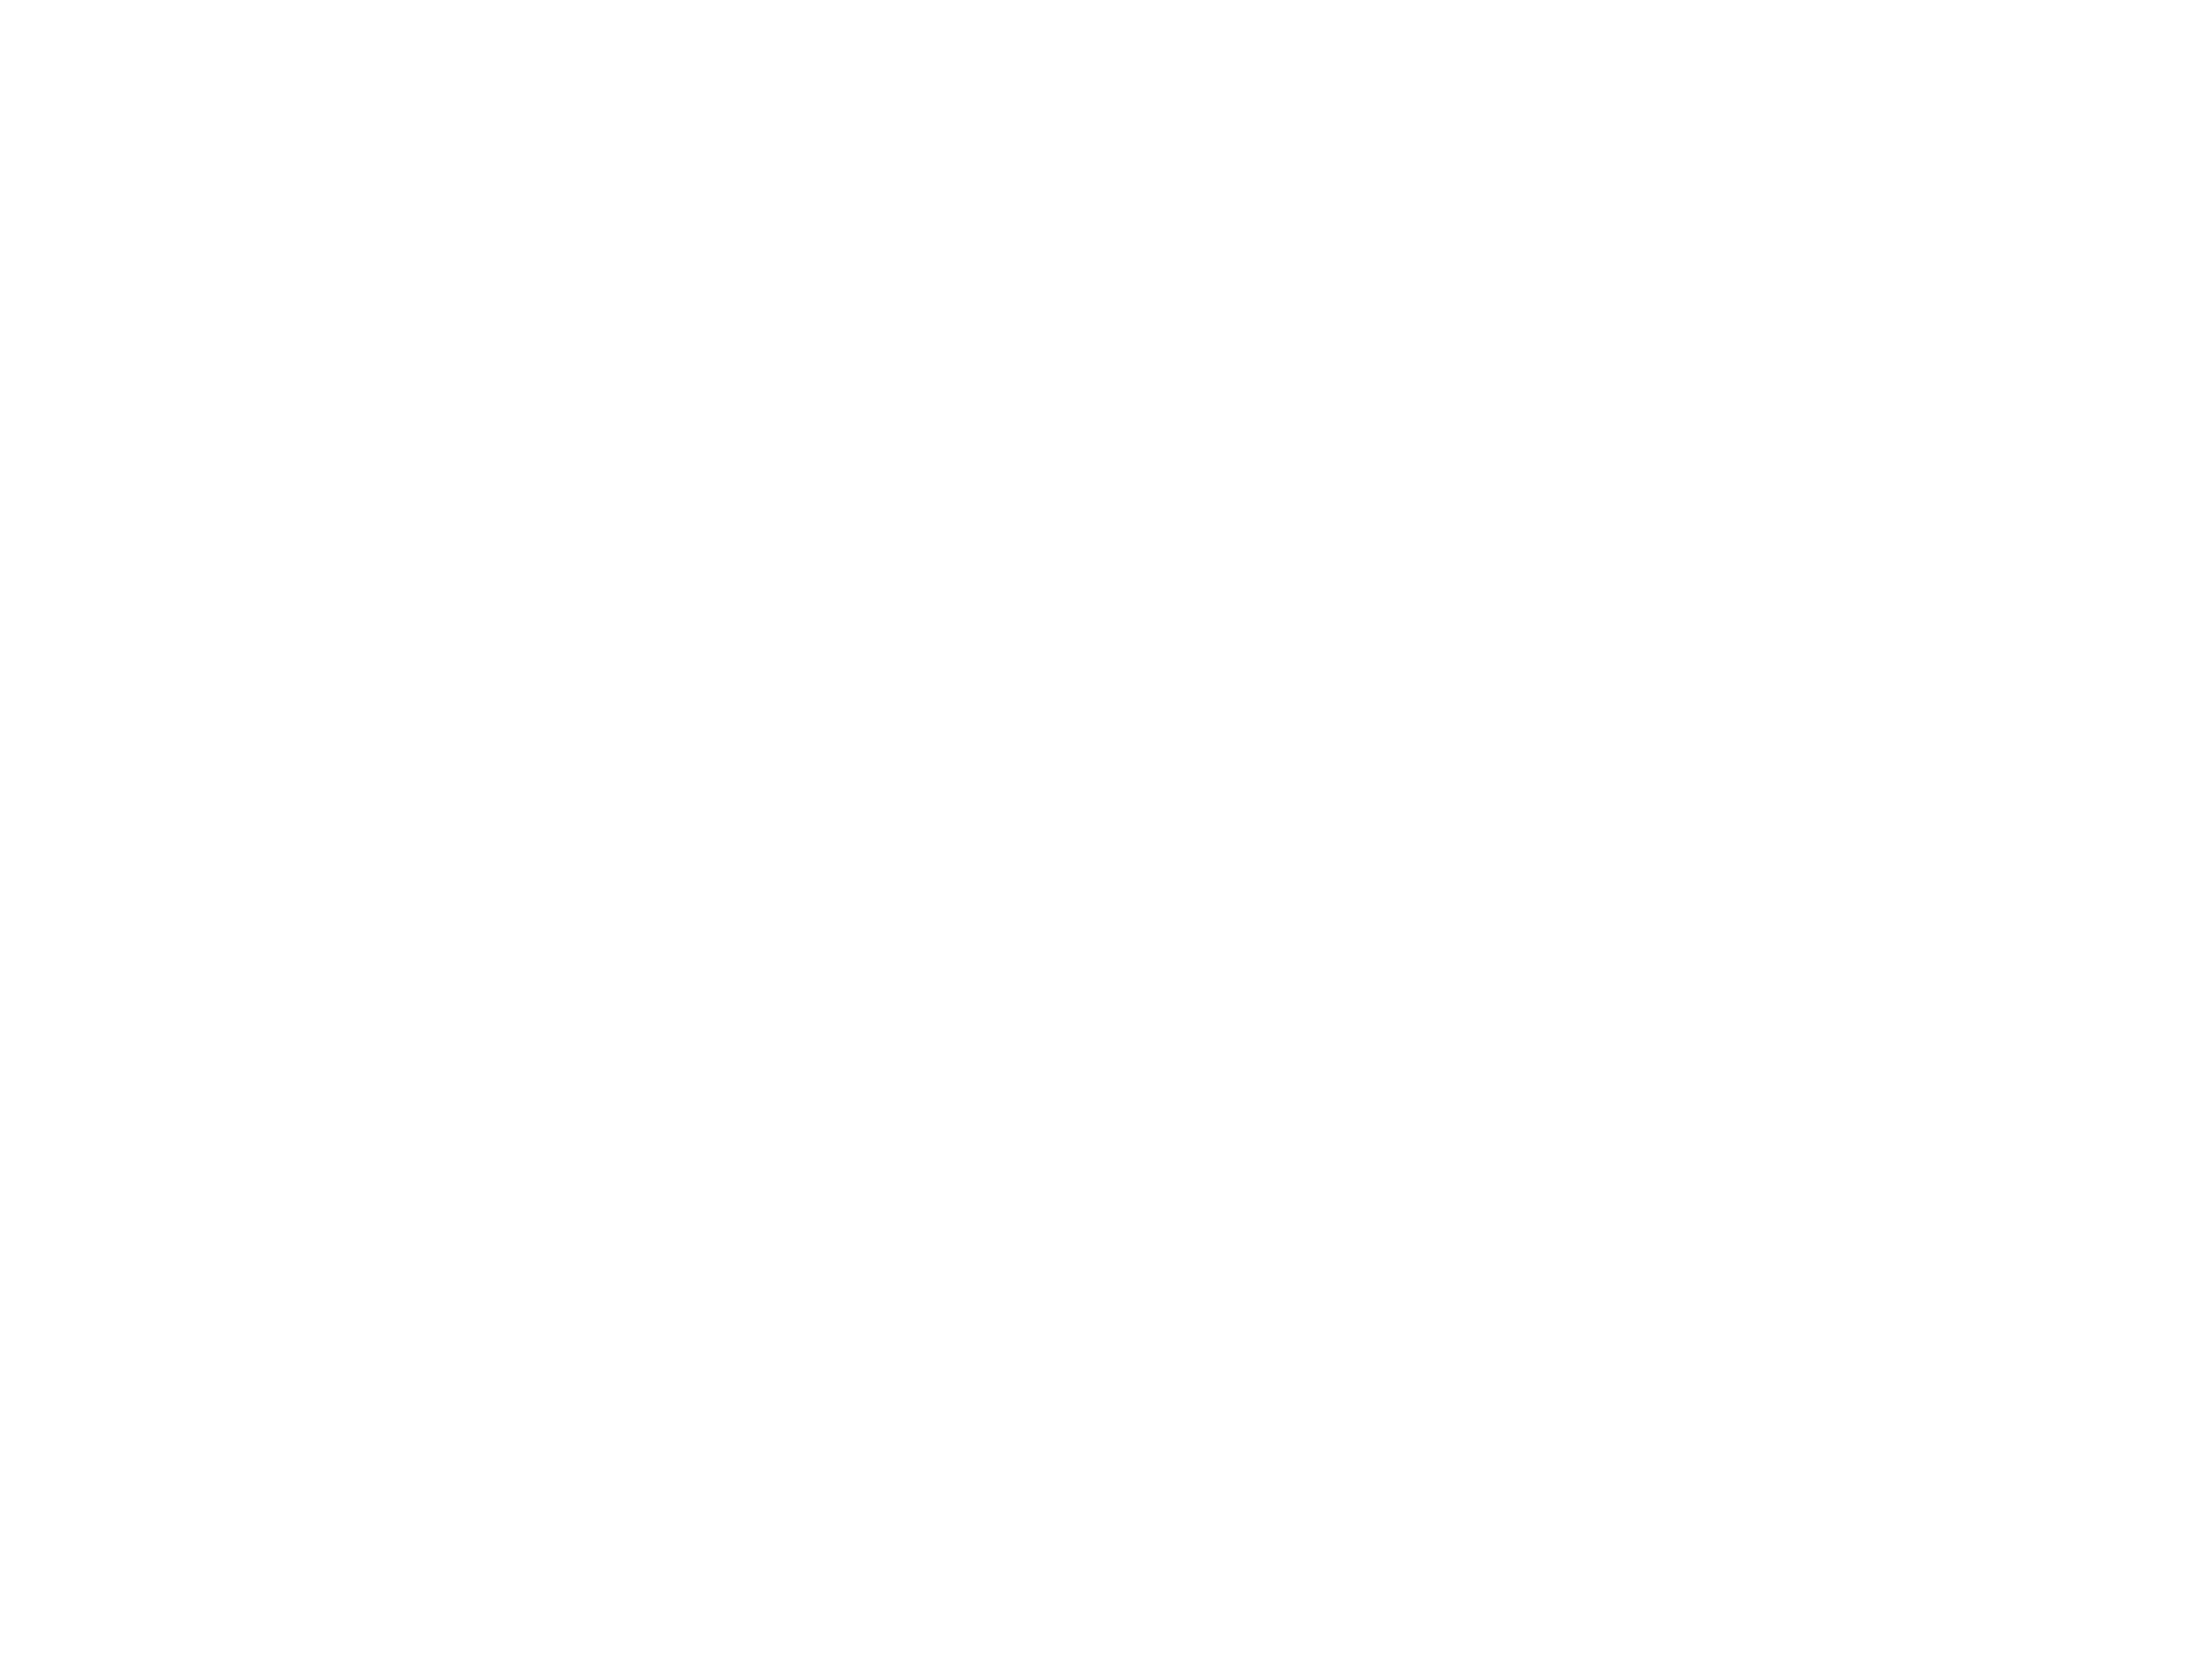 ADWEEK award logo „2020 podcast of the year awards“ „Best branded podcast“, white lettering on black background